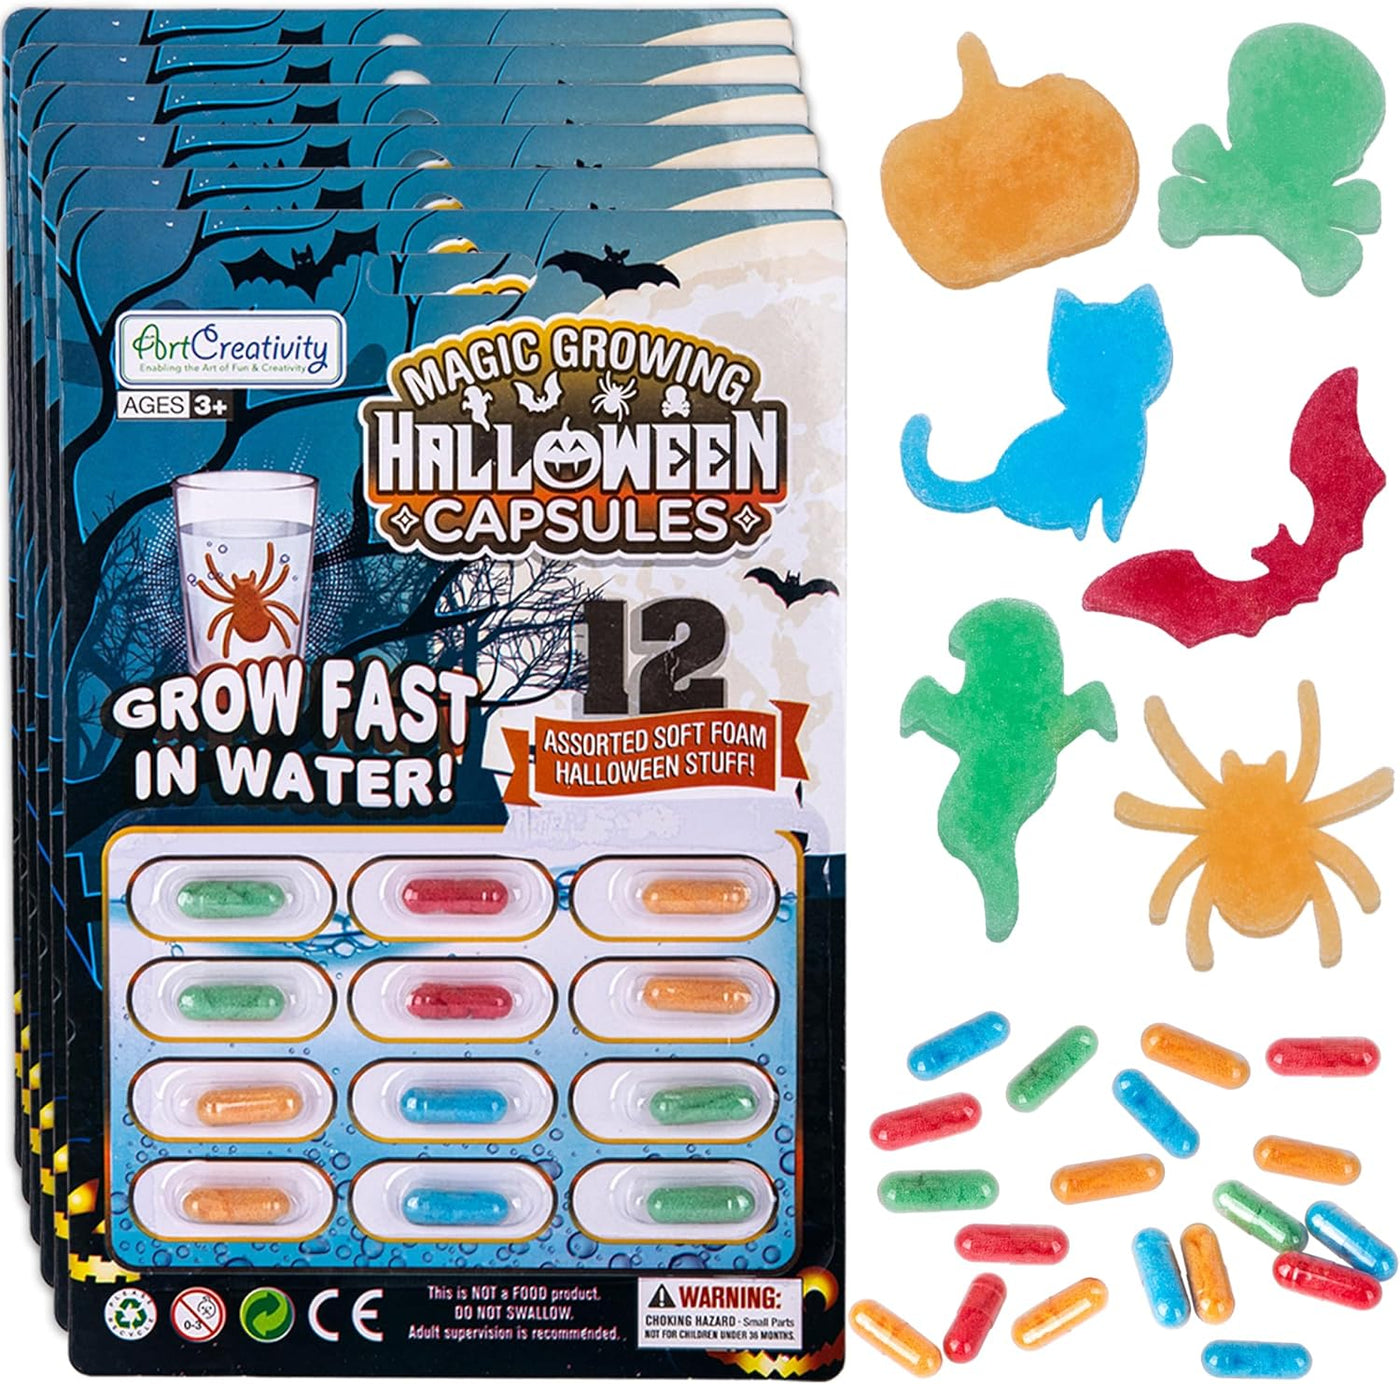 ArtCreativity Halloween Magic Growing Capsules, 6 Packs with 12 Expanding Capsules Each, Grow in Water, Cute Color Variety, Kids’ Halloween Party Favors, Contest Prize or Gift Idea